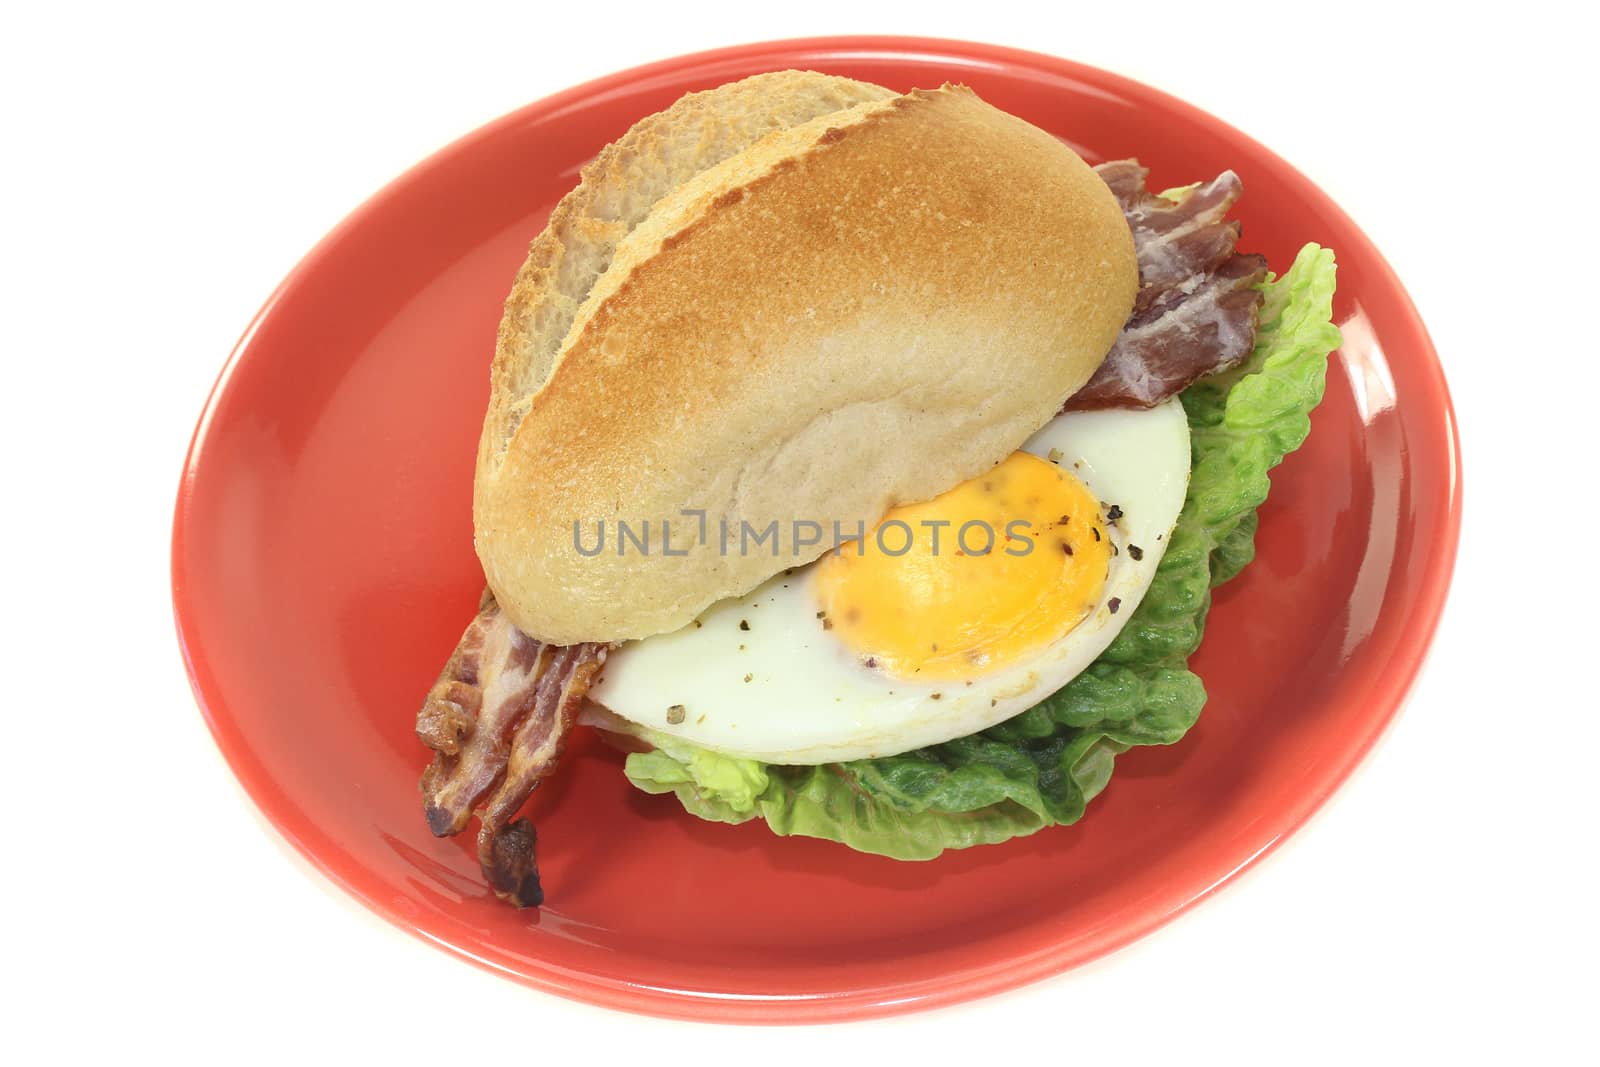 a bun lined with fried egg, bacon and lettuce